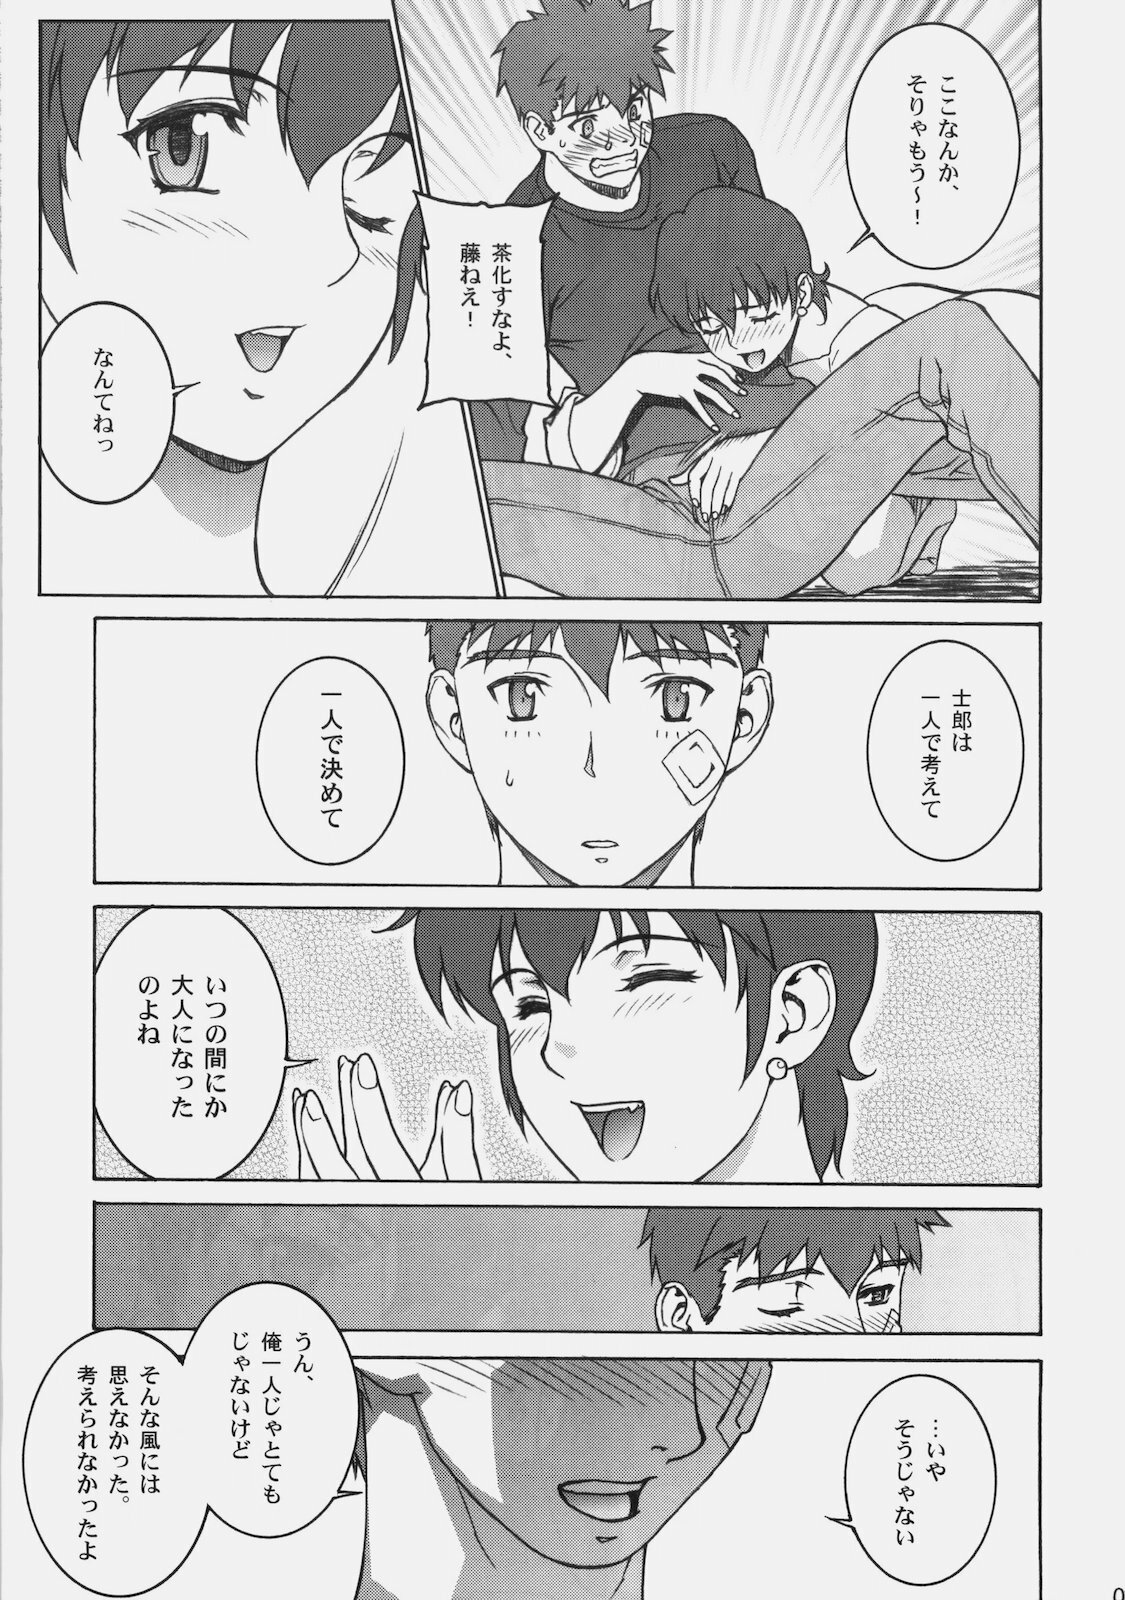 [Motchie Kingdom (Motchie)] Theater of Fate (Fate/stay night) page 16 full